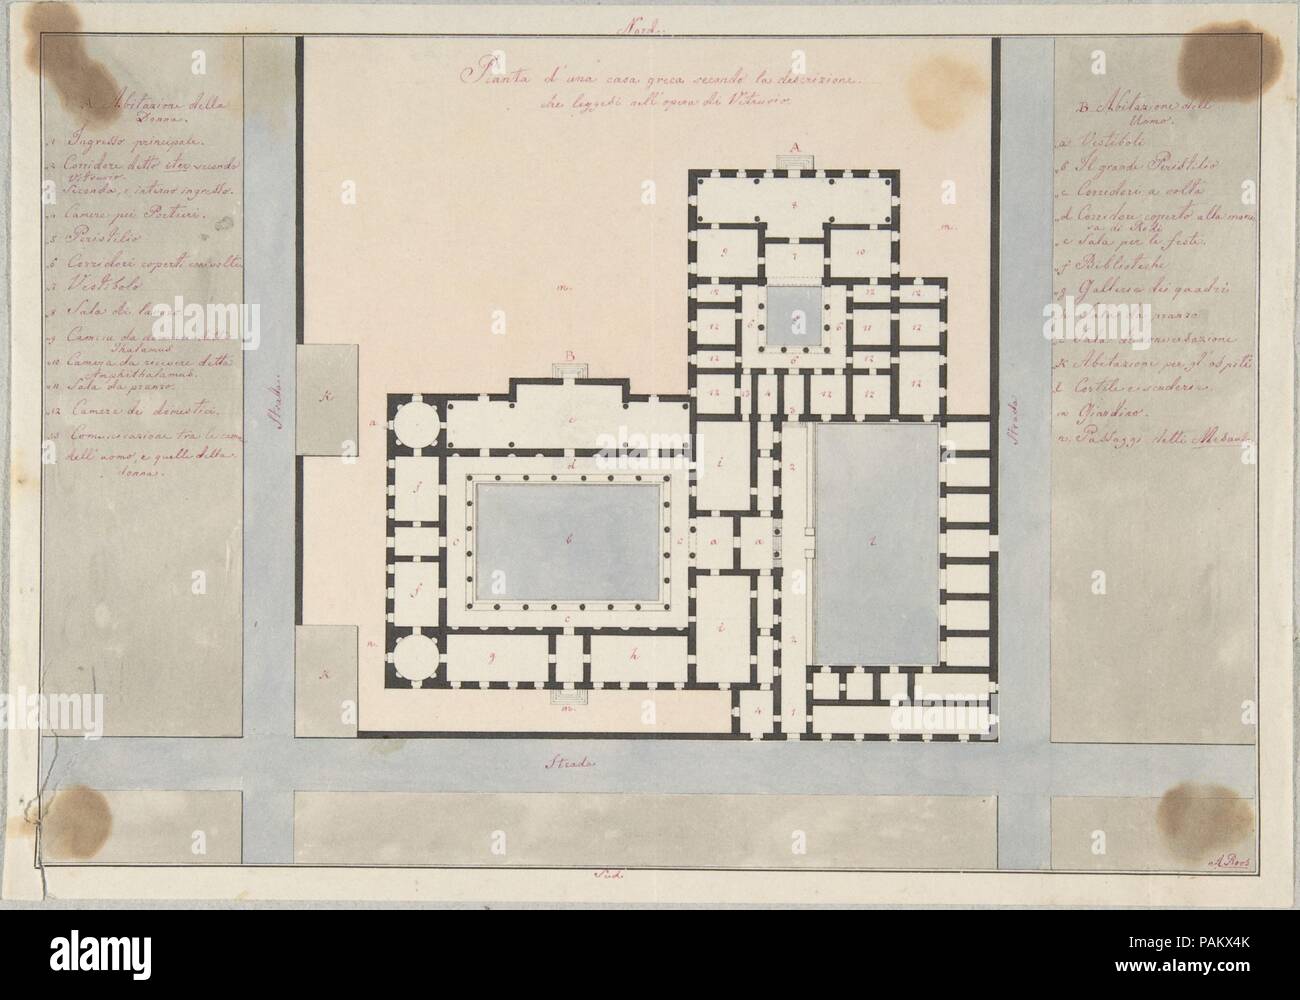 Plan of a Greek House. Artist: Anonymous, Italian, 19th century. Dimensions: 6-3/8 x 9-1/4 in. Date: 1800-1900. Museum: Metropolitan Museum of Art, New York, USA. Stock Photo